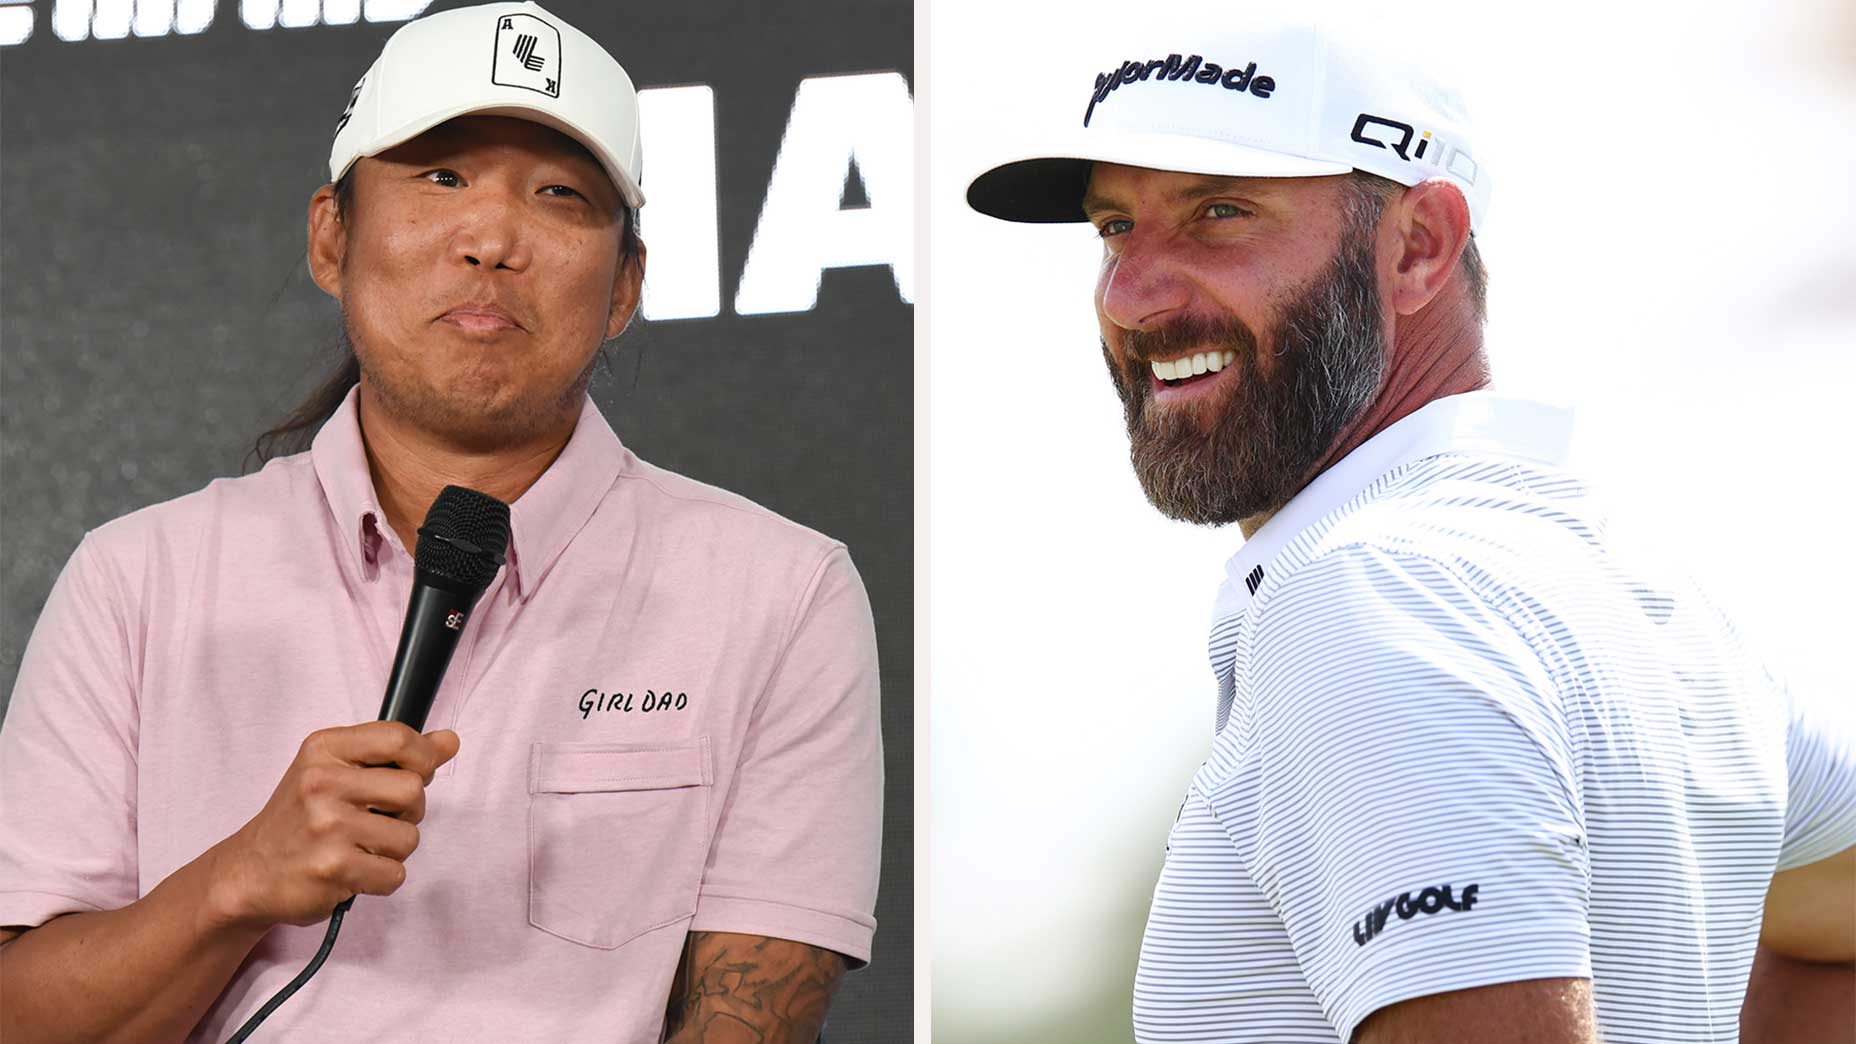 Anthony Kim missed a LOT during his absence. Dustin Johnson (!) caught him up